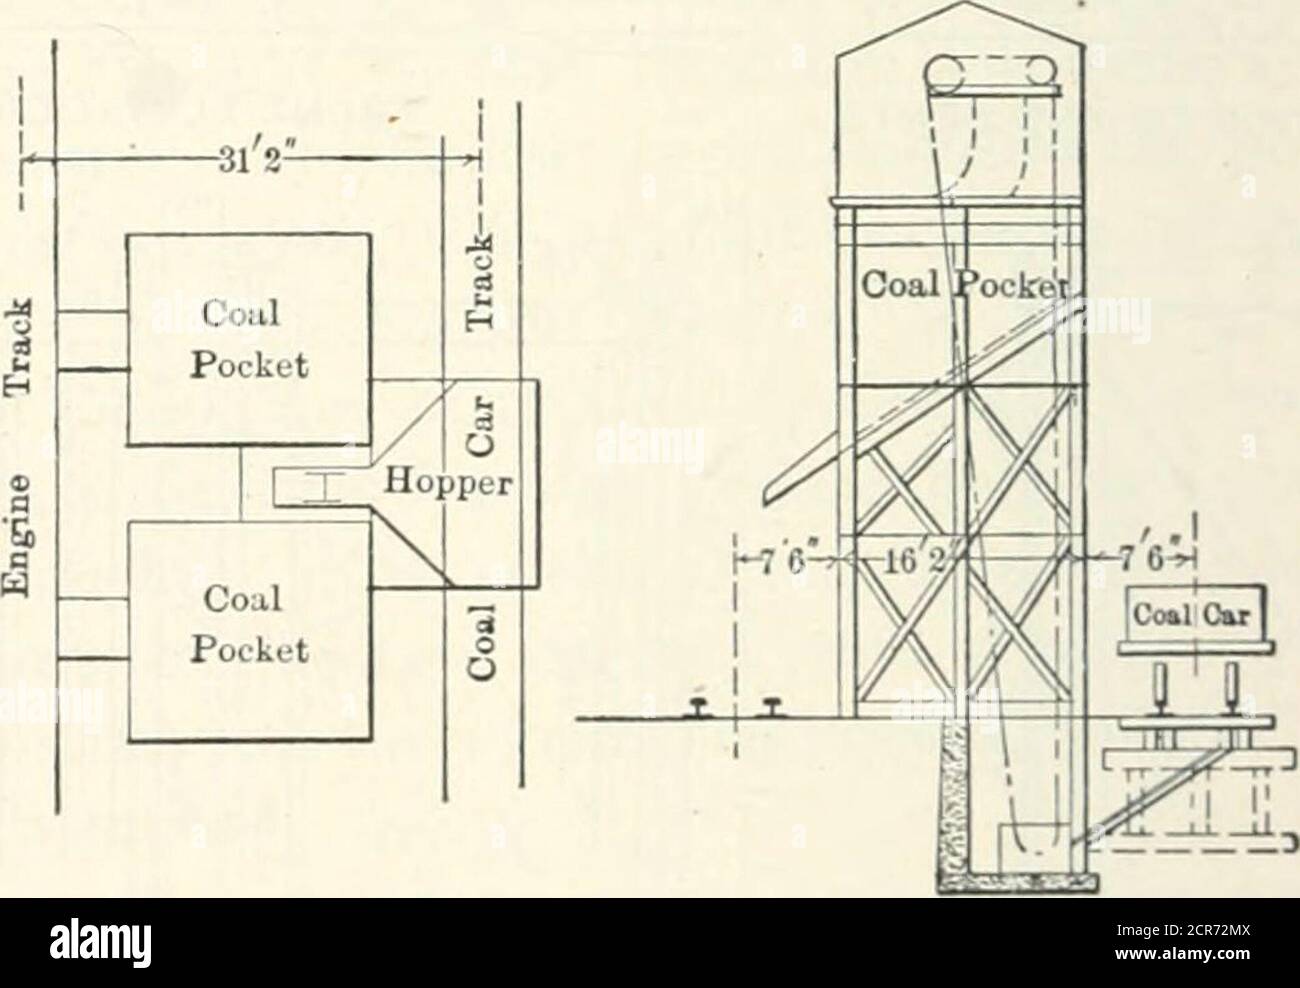 . Railroad structures and estimates . SIDE ELEVATION ^-^^ Fig. 224. Coaling Station with Locomotive Hoist. 478 MECHANICAL PLANTS. Mechanical Plants. — The ordinary mechanical plants, con-sisting of elevated pockets fed by endless chain, belt, or buckets,are arranged to hold from 30 to 800 tons or more, the amountof coal elevated per day depending upon the capacity required,the number of tracks to be served, and the storage necessary foremergencies. The cost of a mechanical type of coaling plant varies accord-ing to capacity and style of plant adopted, and may range from$20 to $75 per ton capac Stock Photo